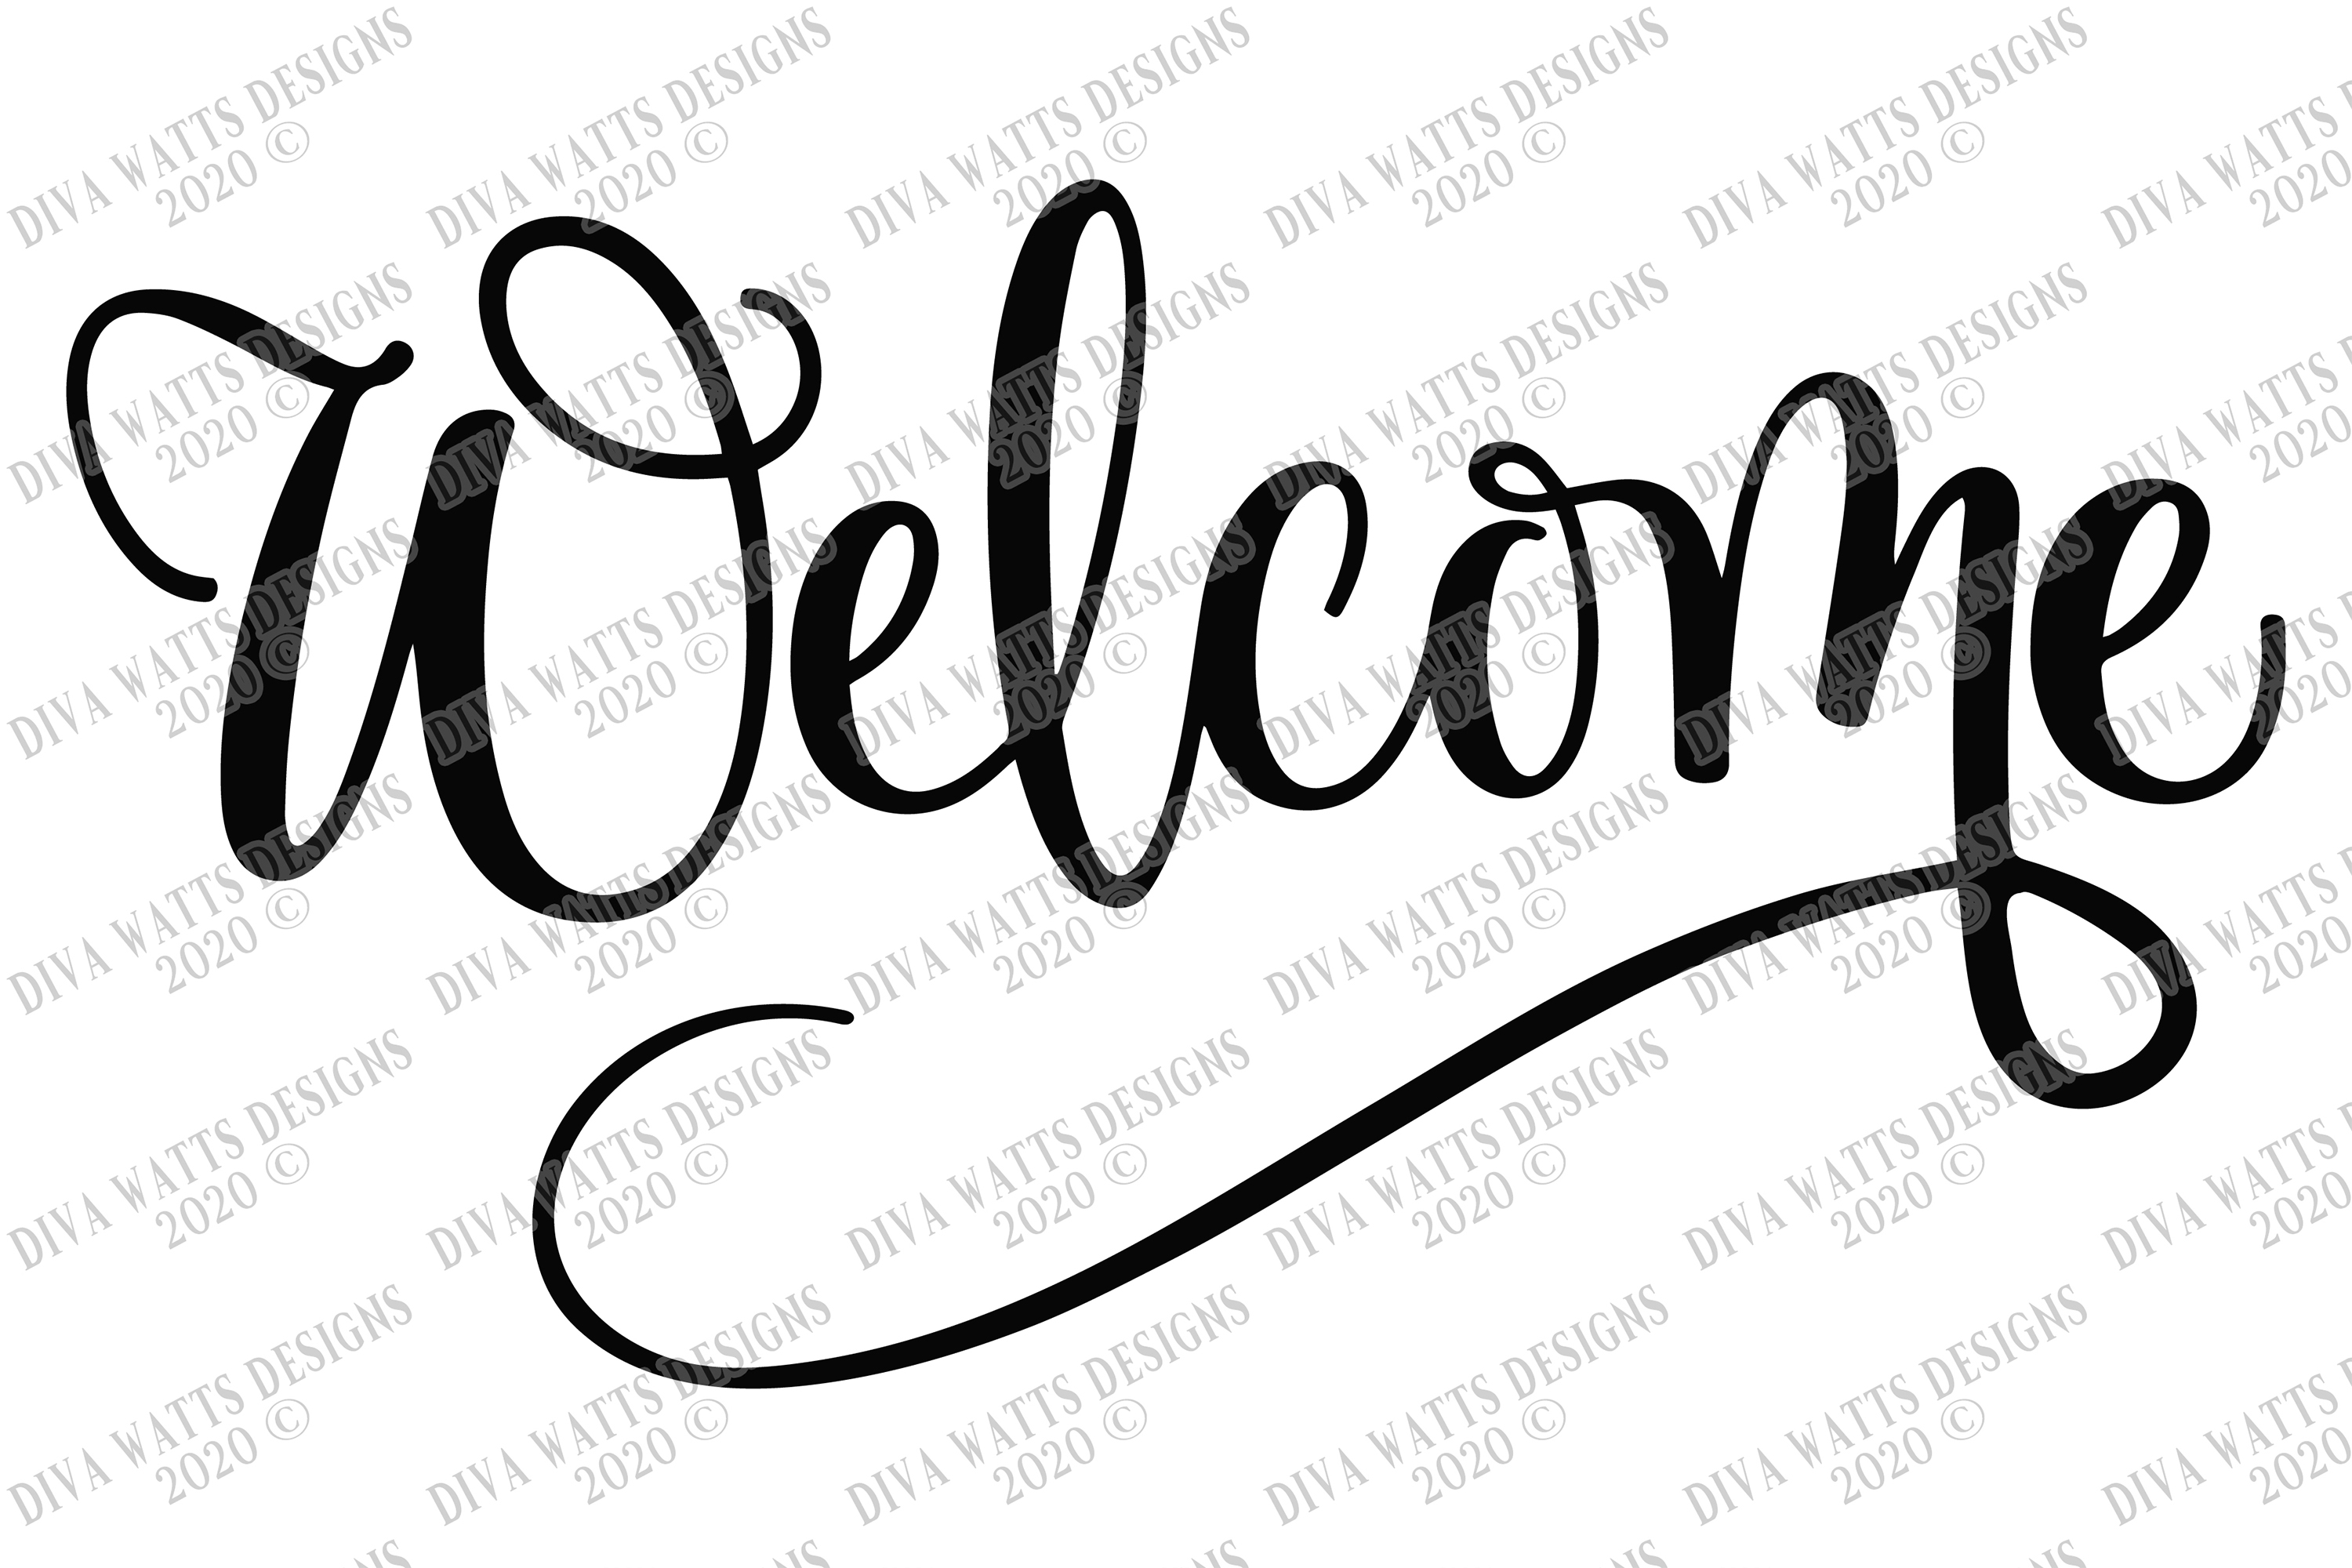 Welcome - Bouncy Farmhouse Script - SVG DXF EPS Cutting File